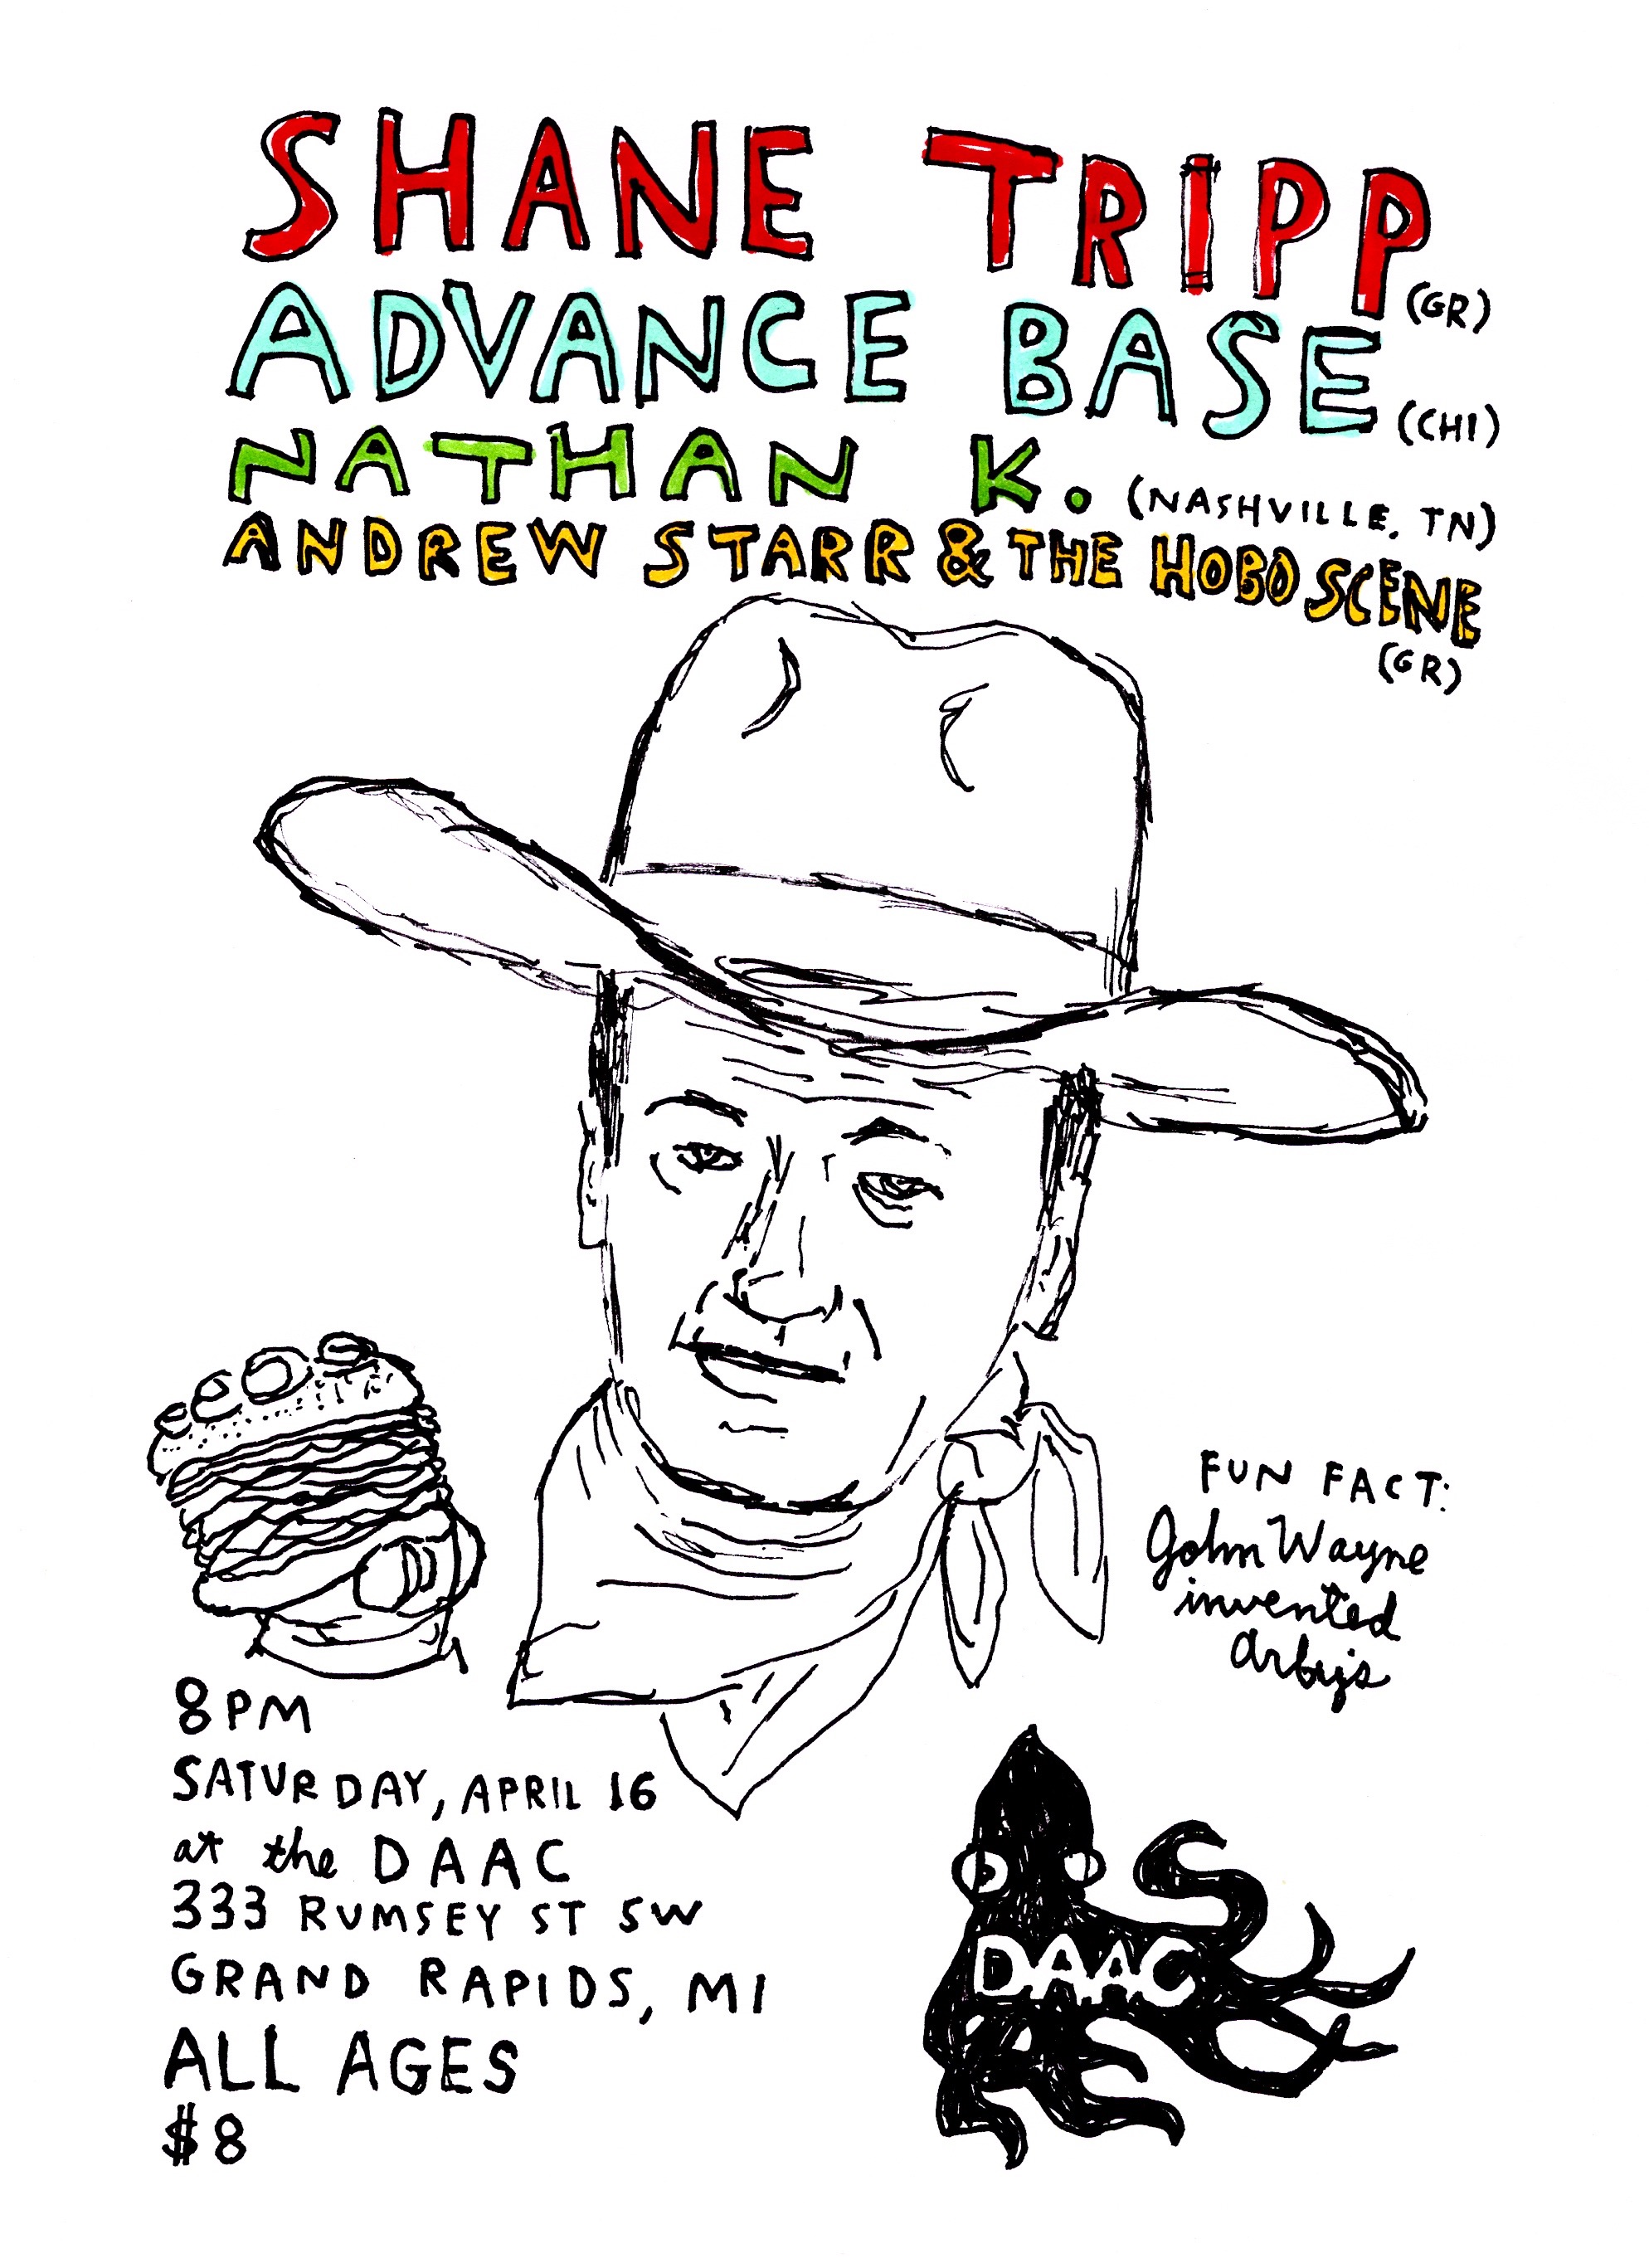 Black pen and ink portrait of John Wayne wearing his classic cowboy hat and bandana, holding up a cheeseburger in one hand